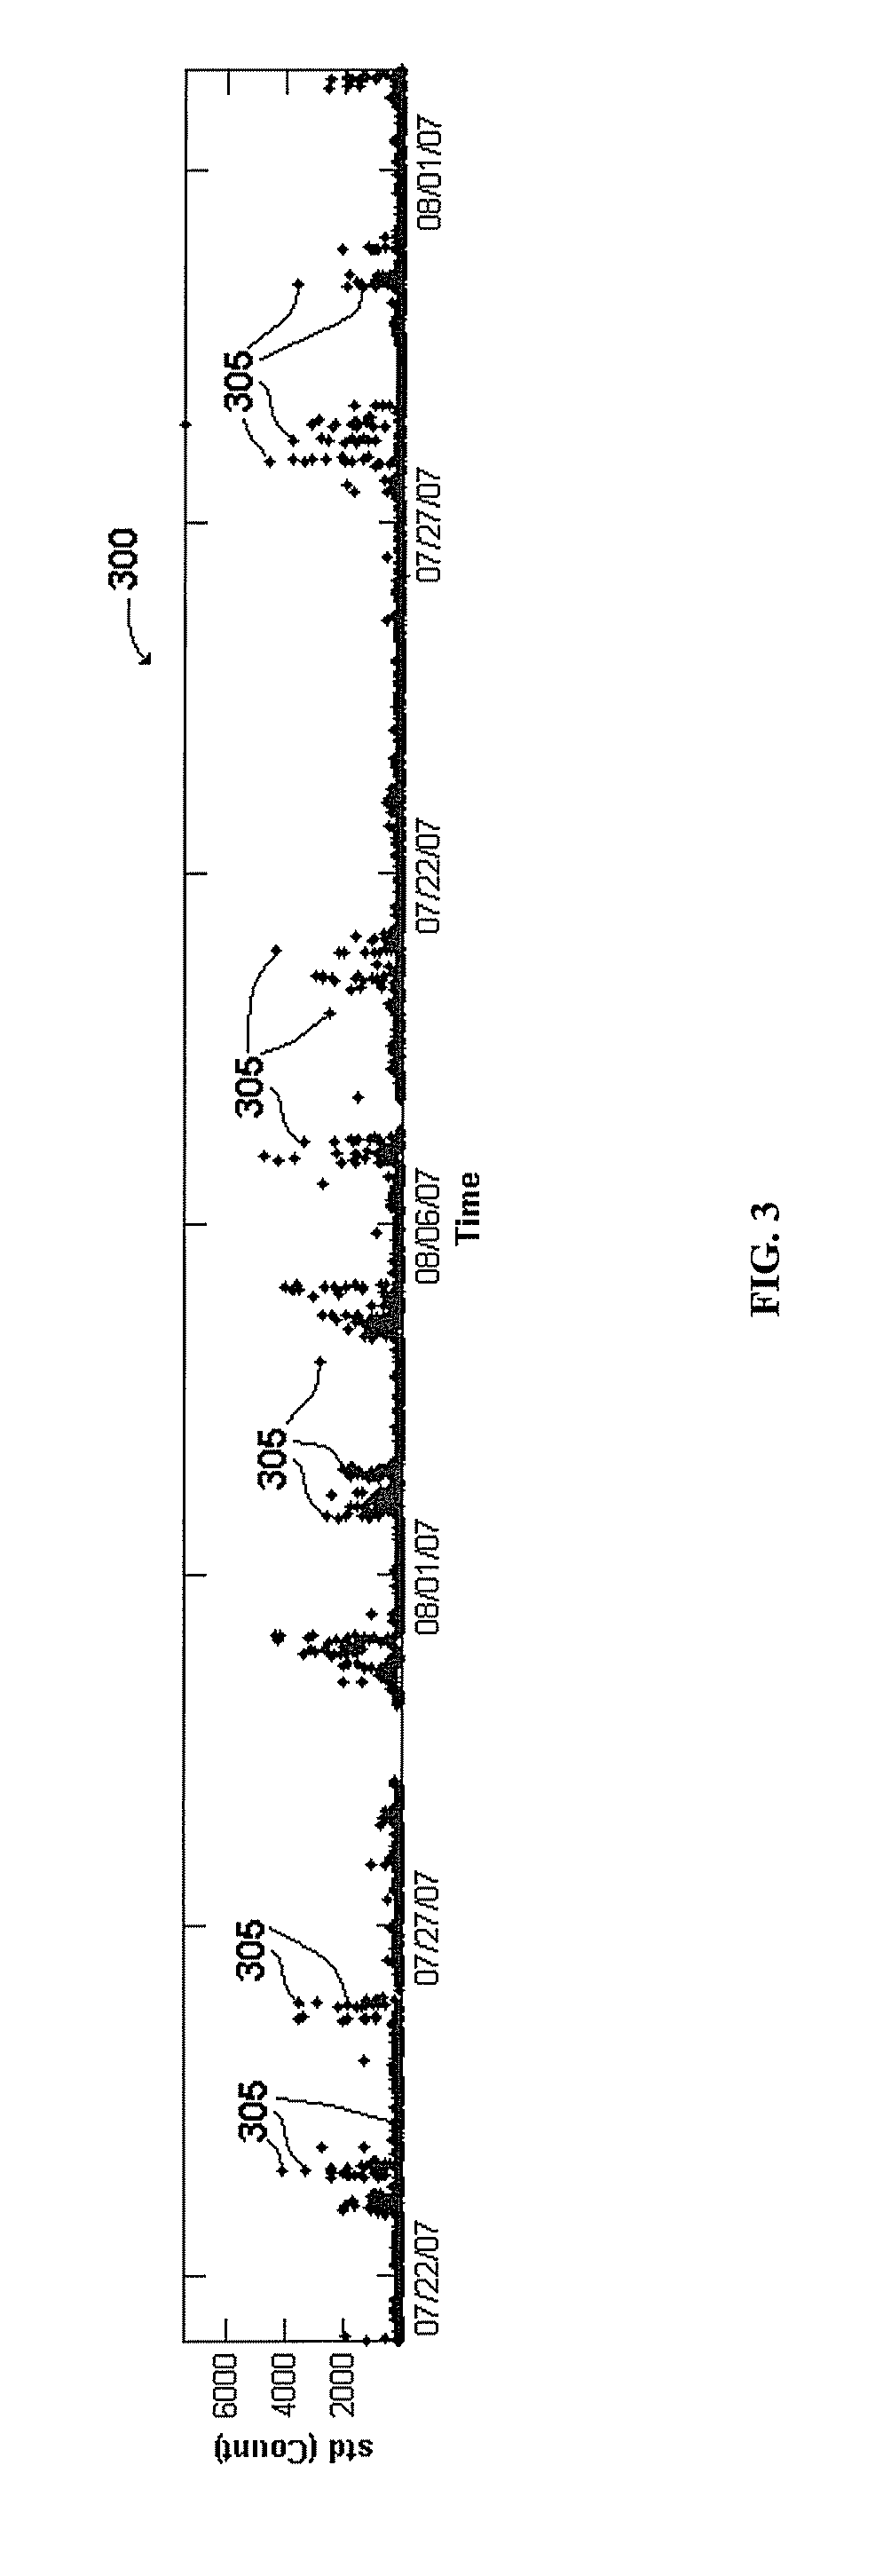 System and method for filtering seismic noise data to analyze seismic events